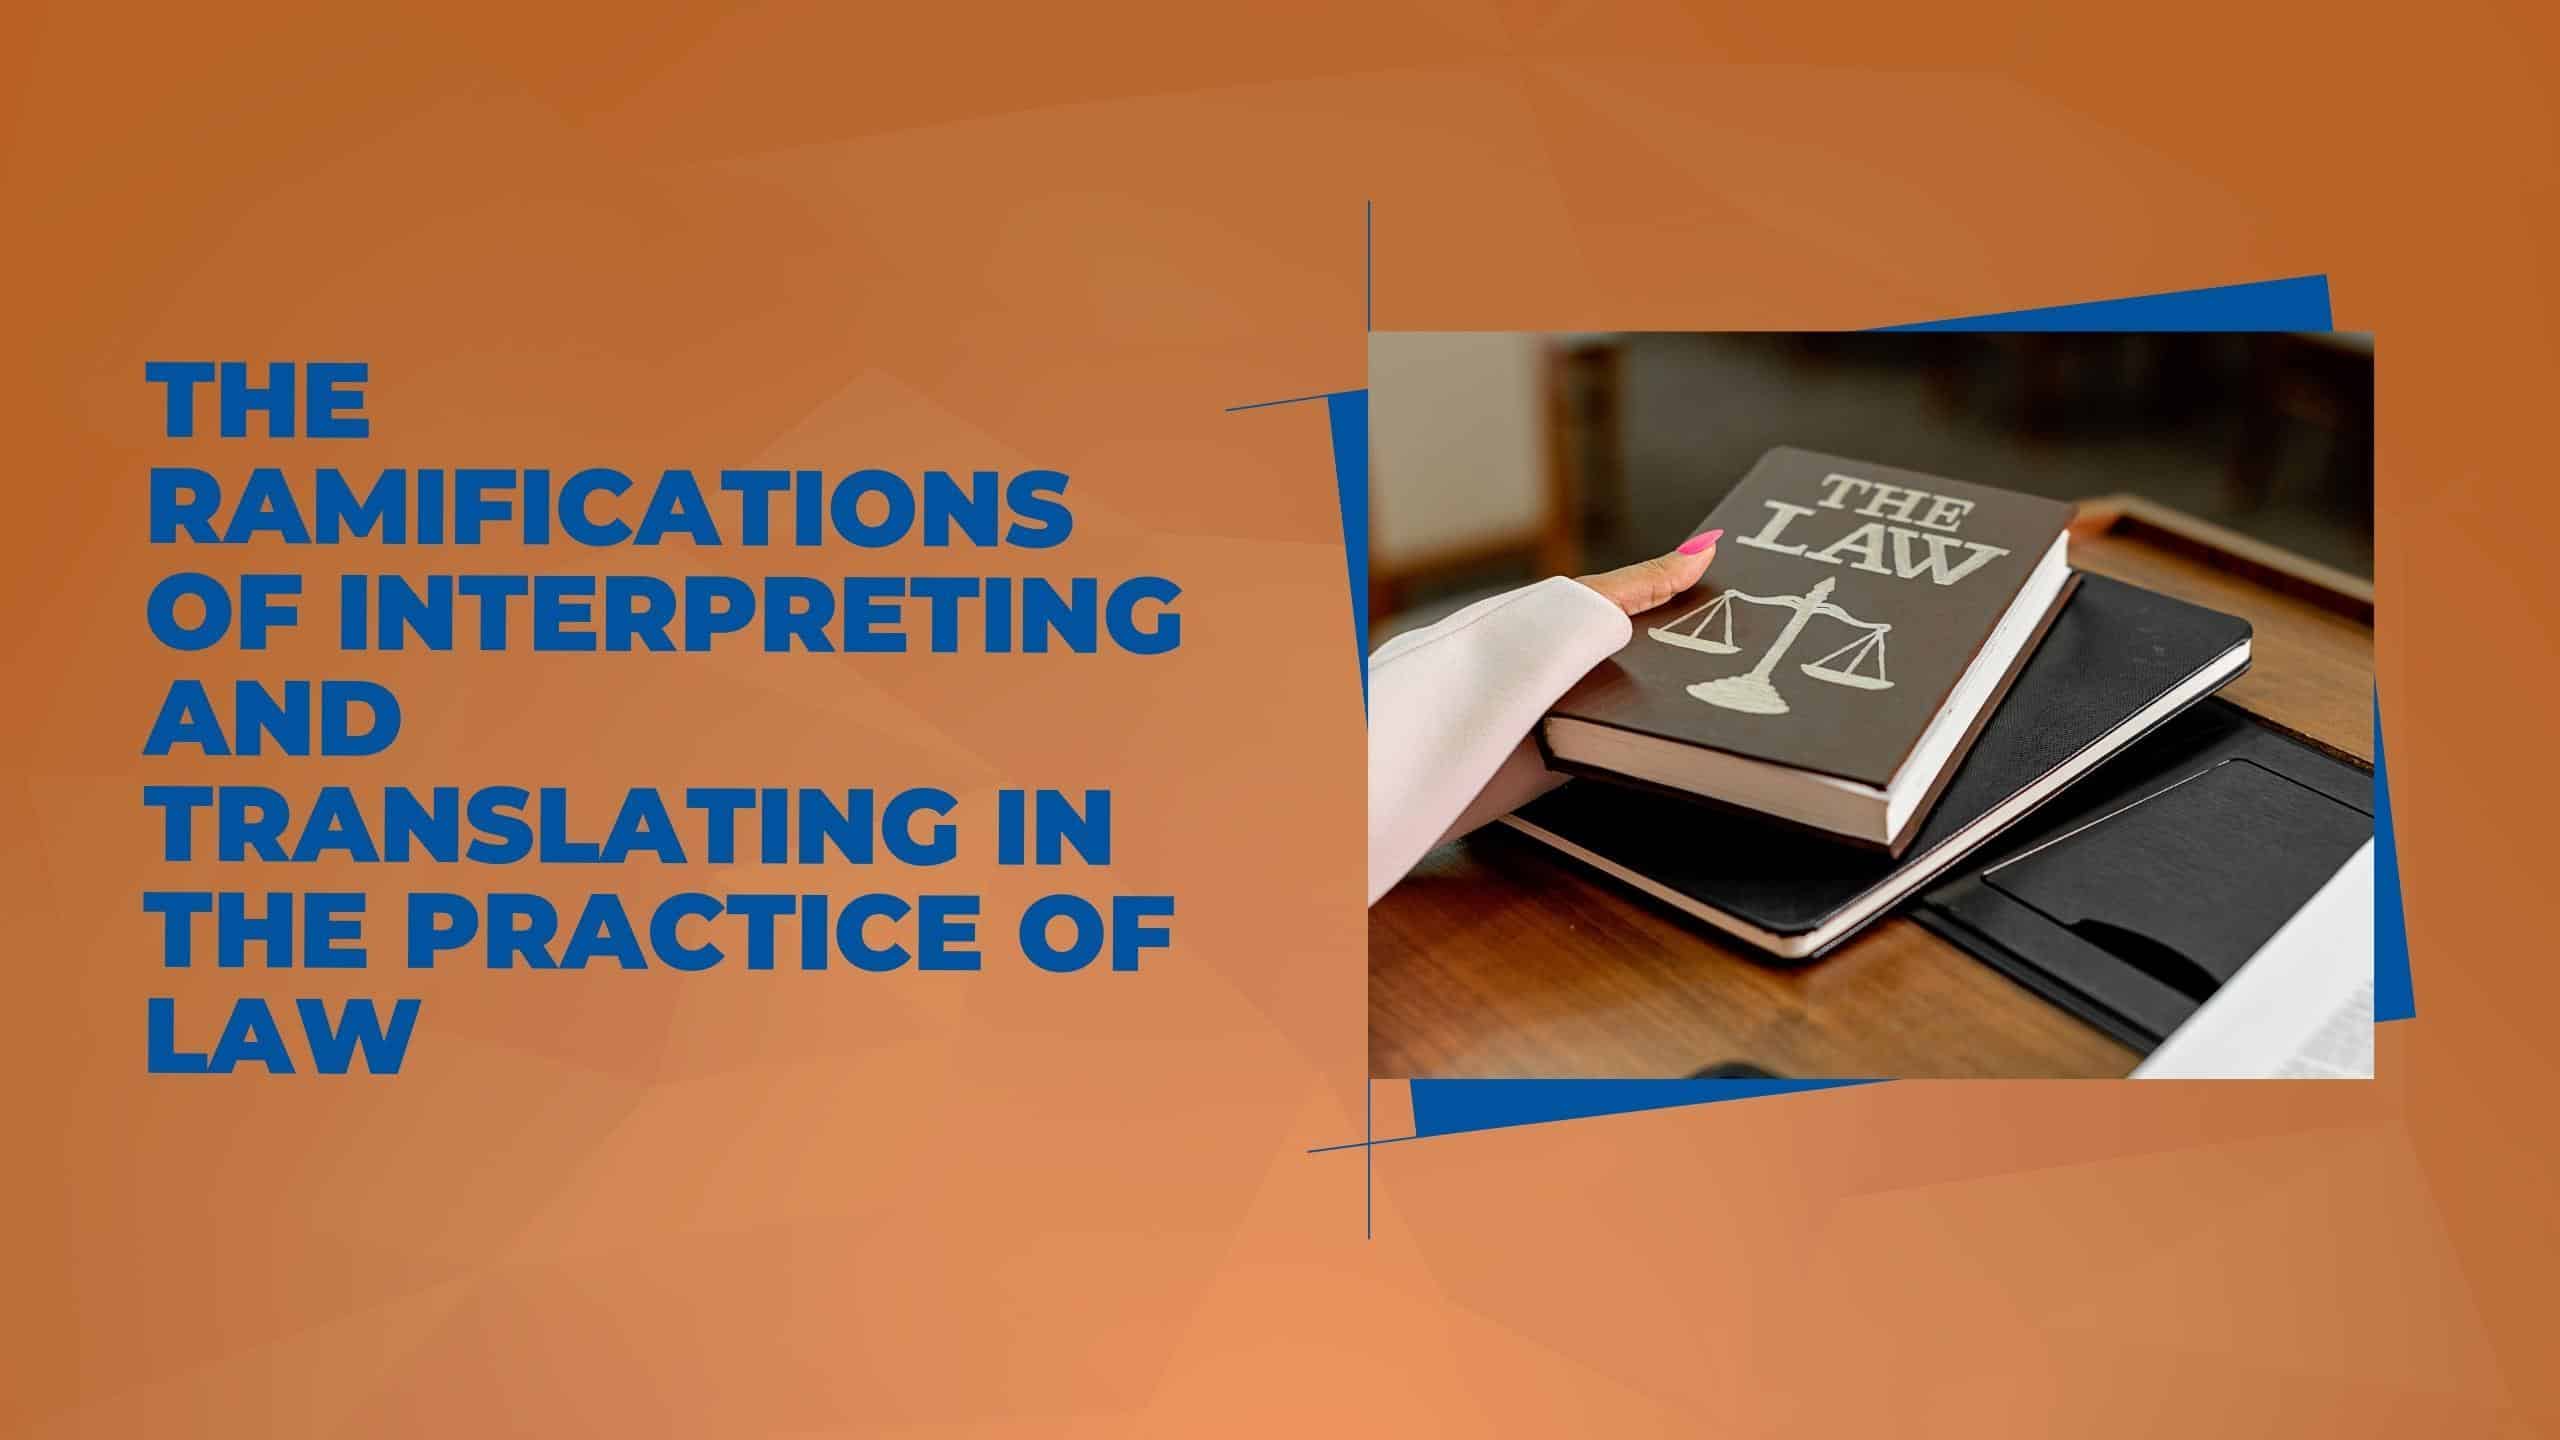 The Ramifications of Interpreting and Translating in the Practice of Law